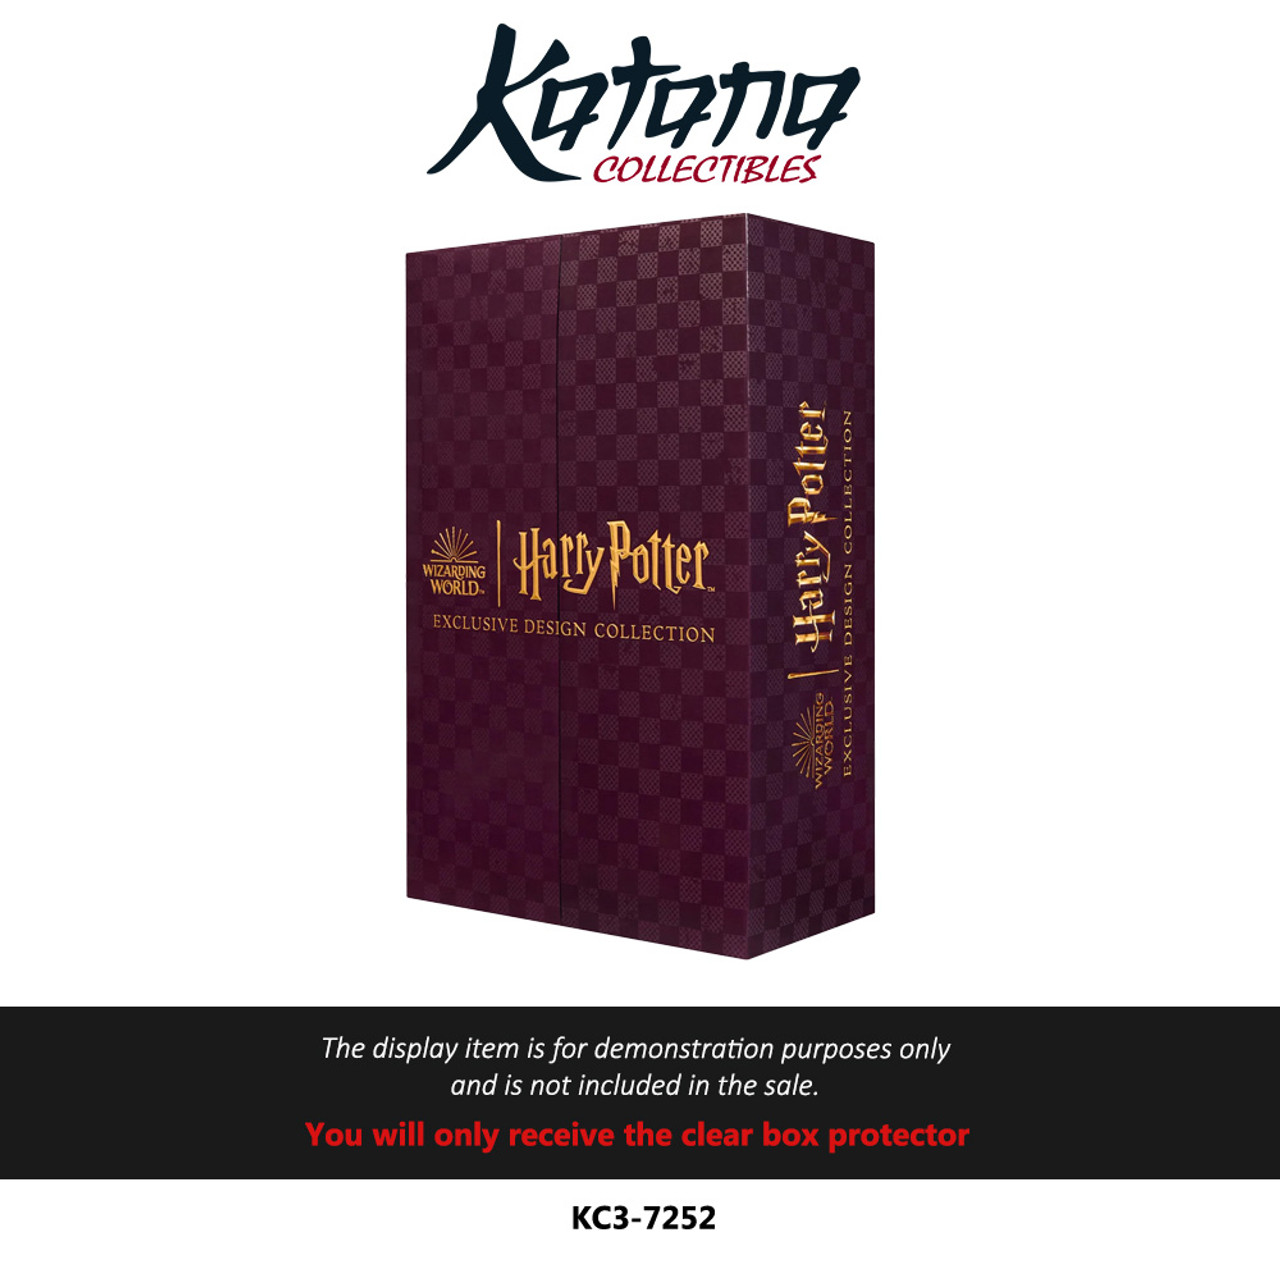 Katana Collectibles Protector For Mattel Creations Harry Potter Design Collection